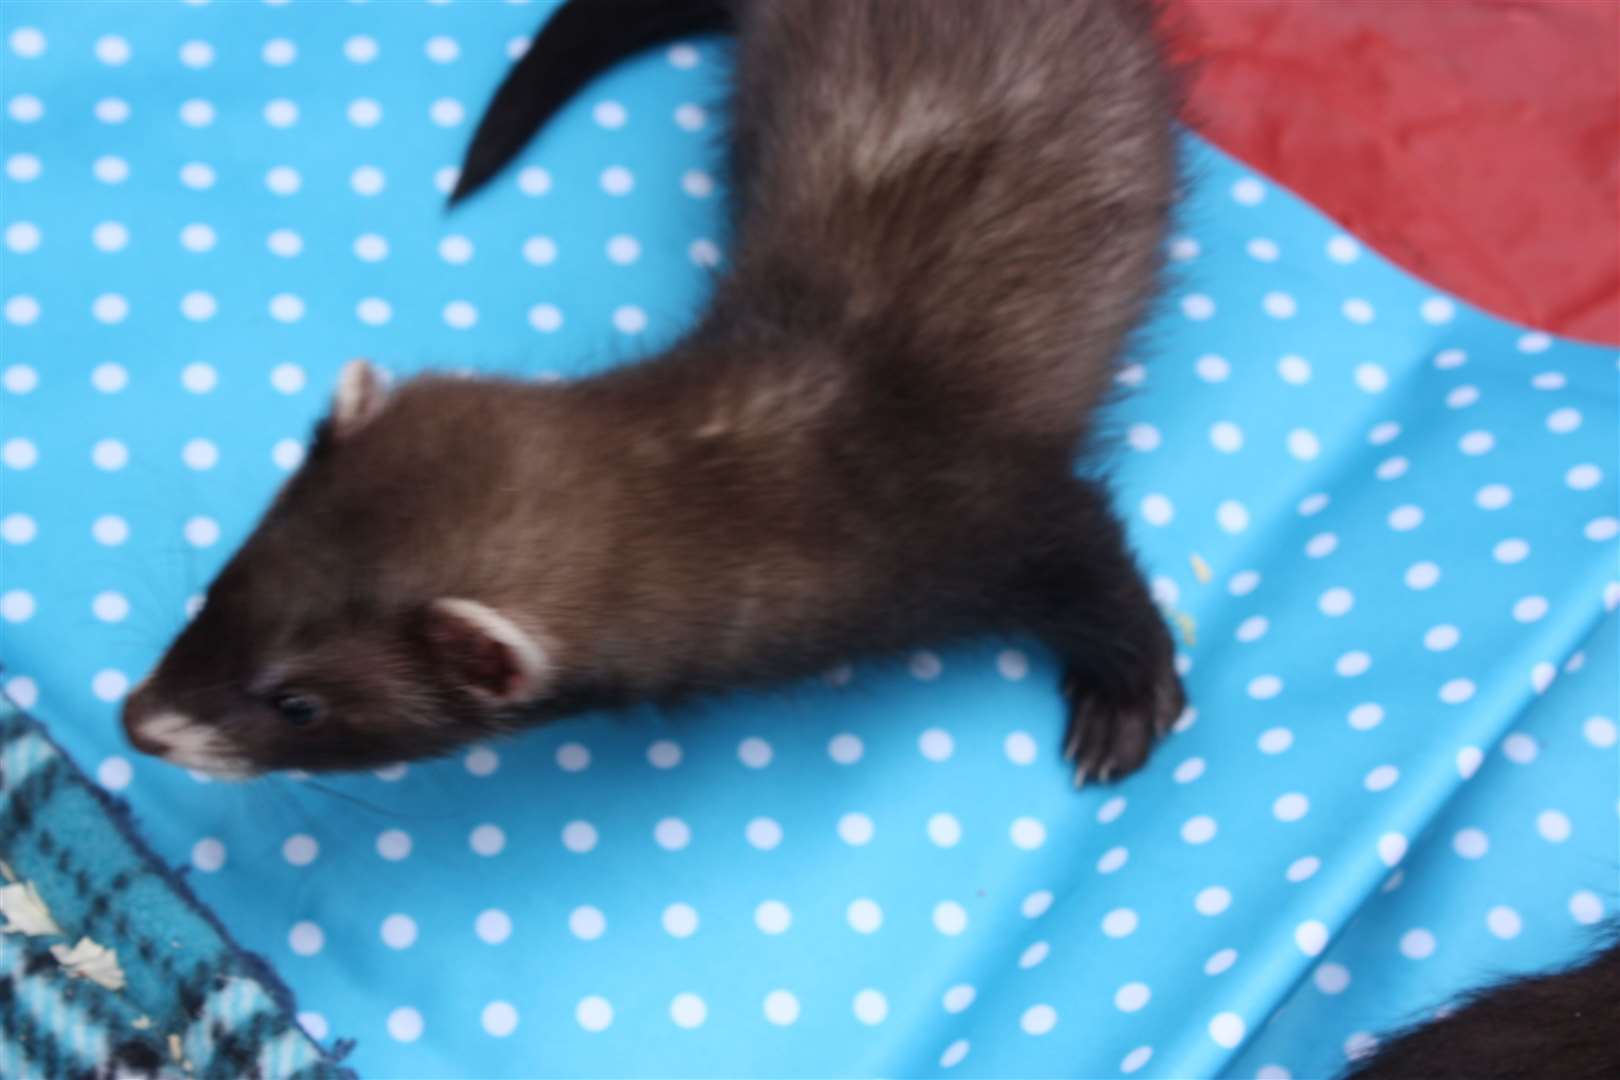 Have you seen this ferret?